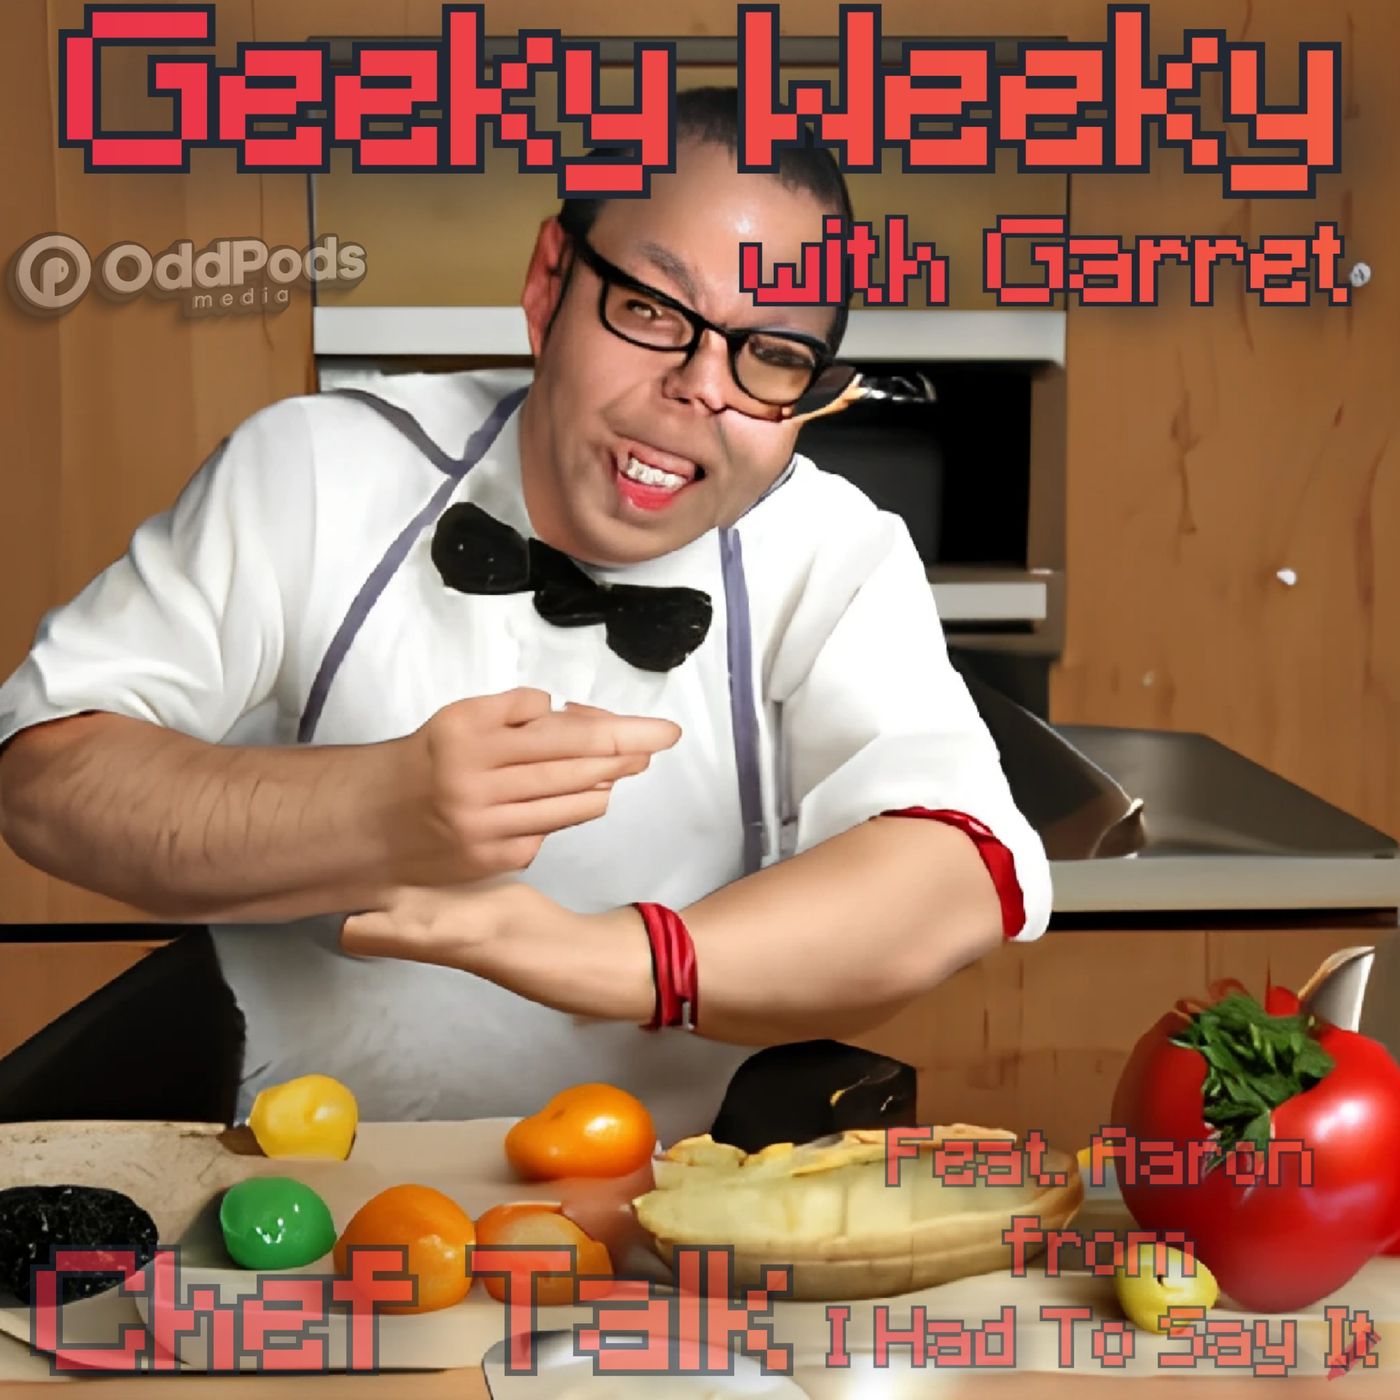 Geeky Weeky: Yes Chef, Thank you Chef